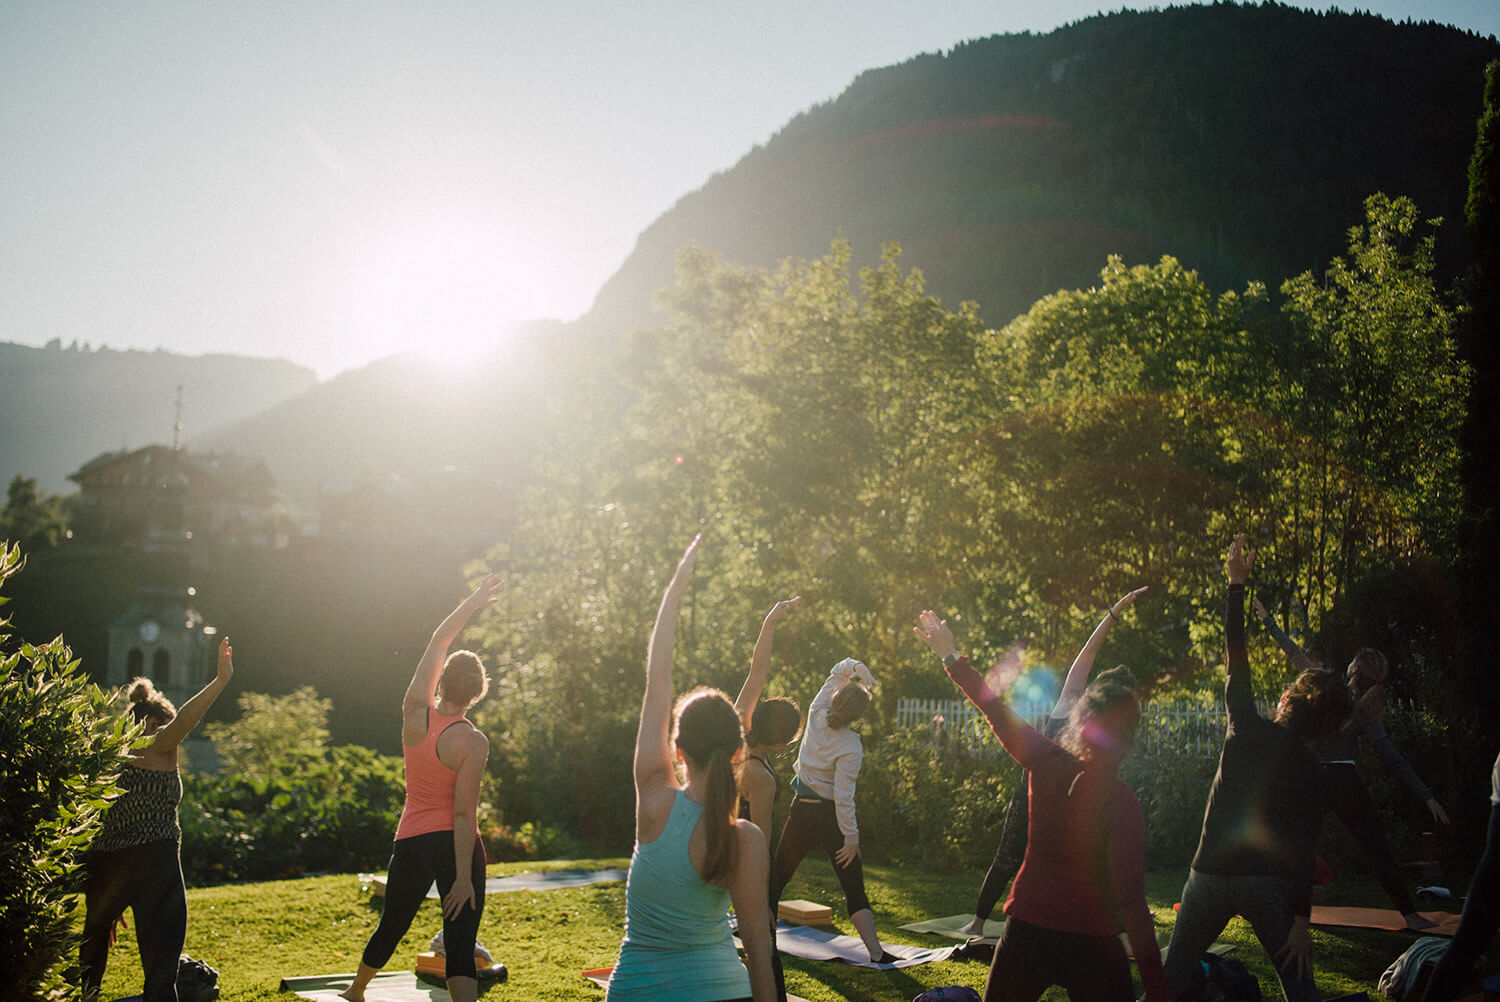 yoga retreat in the French Alps